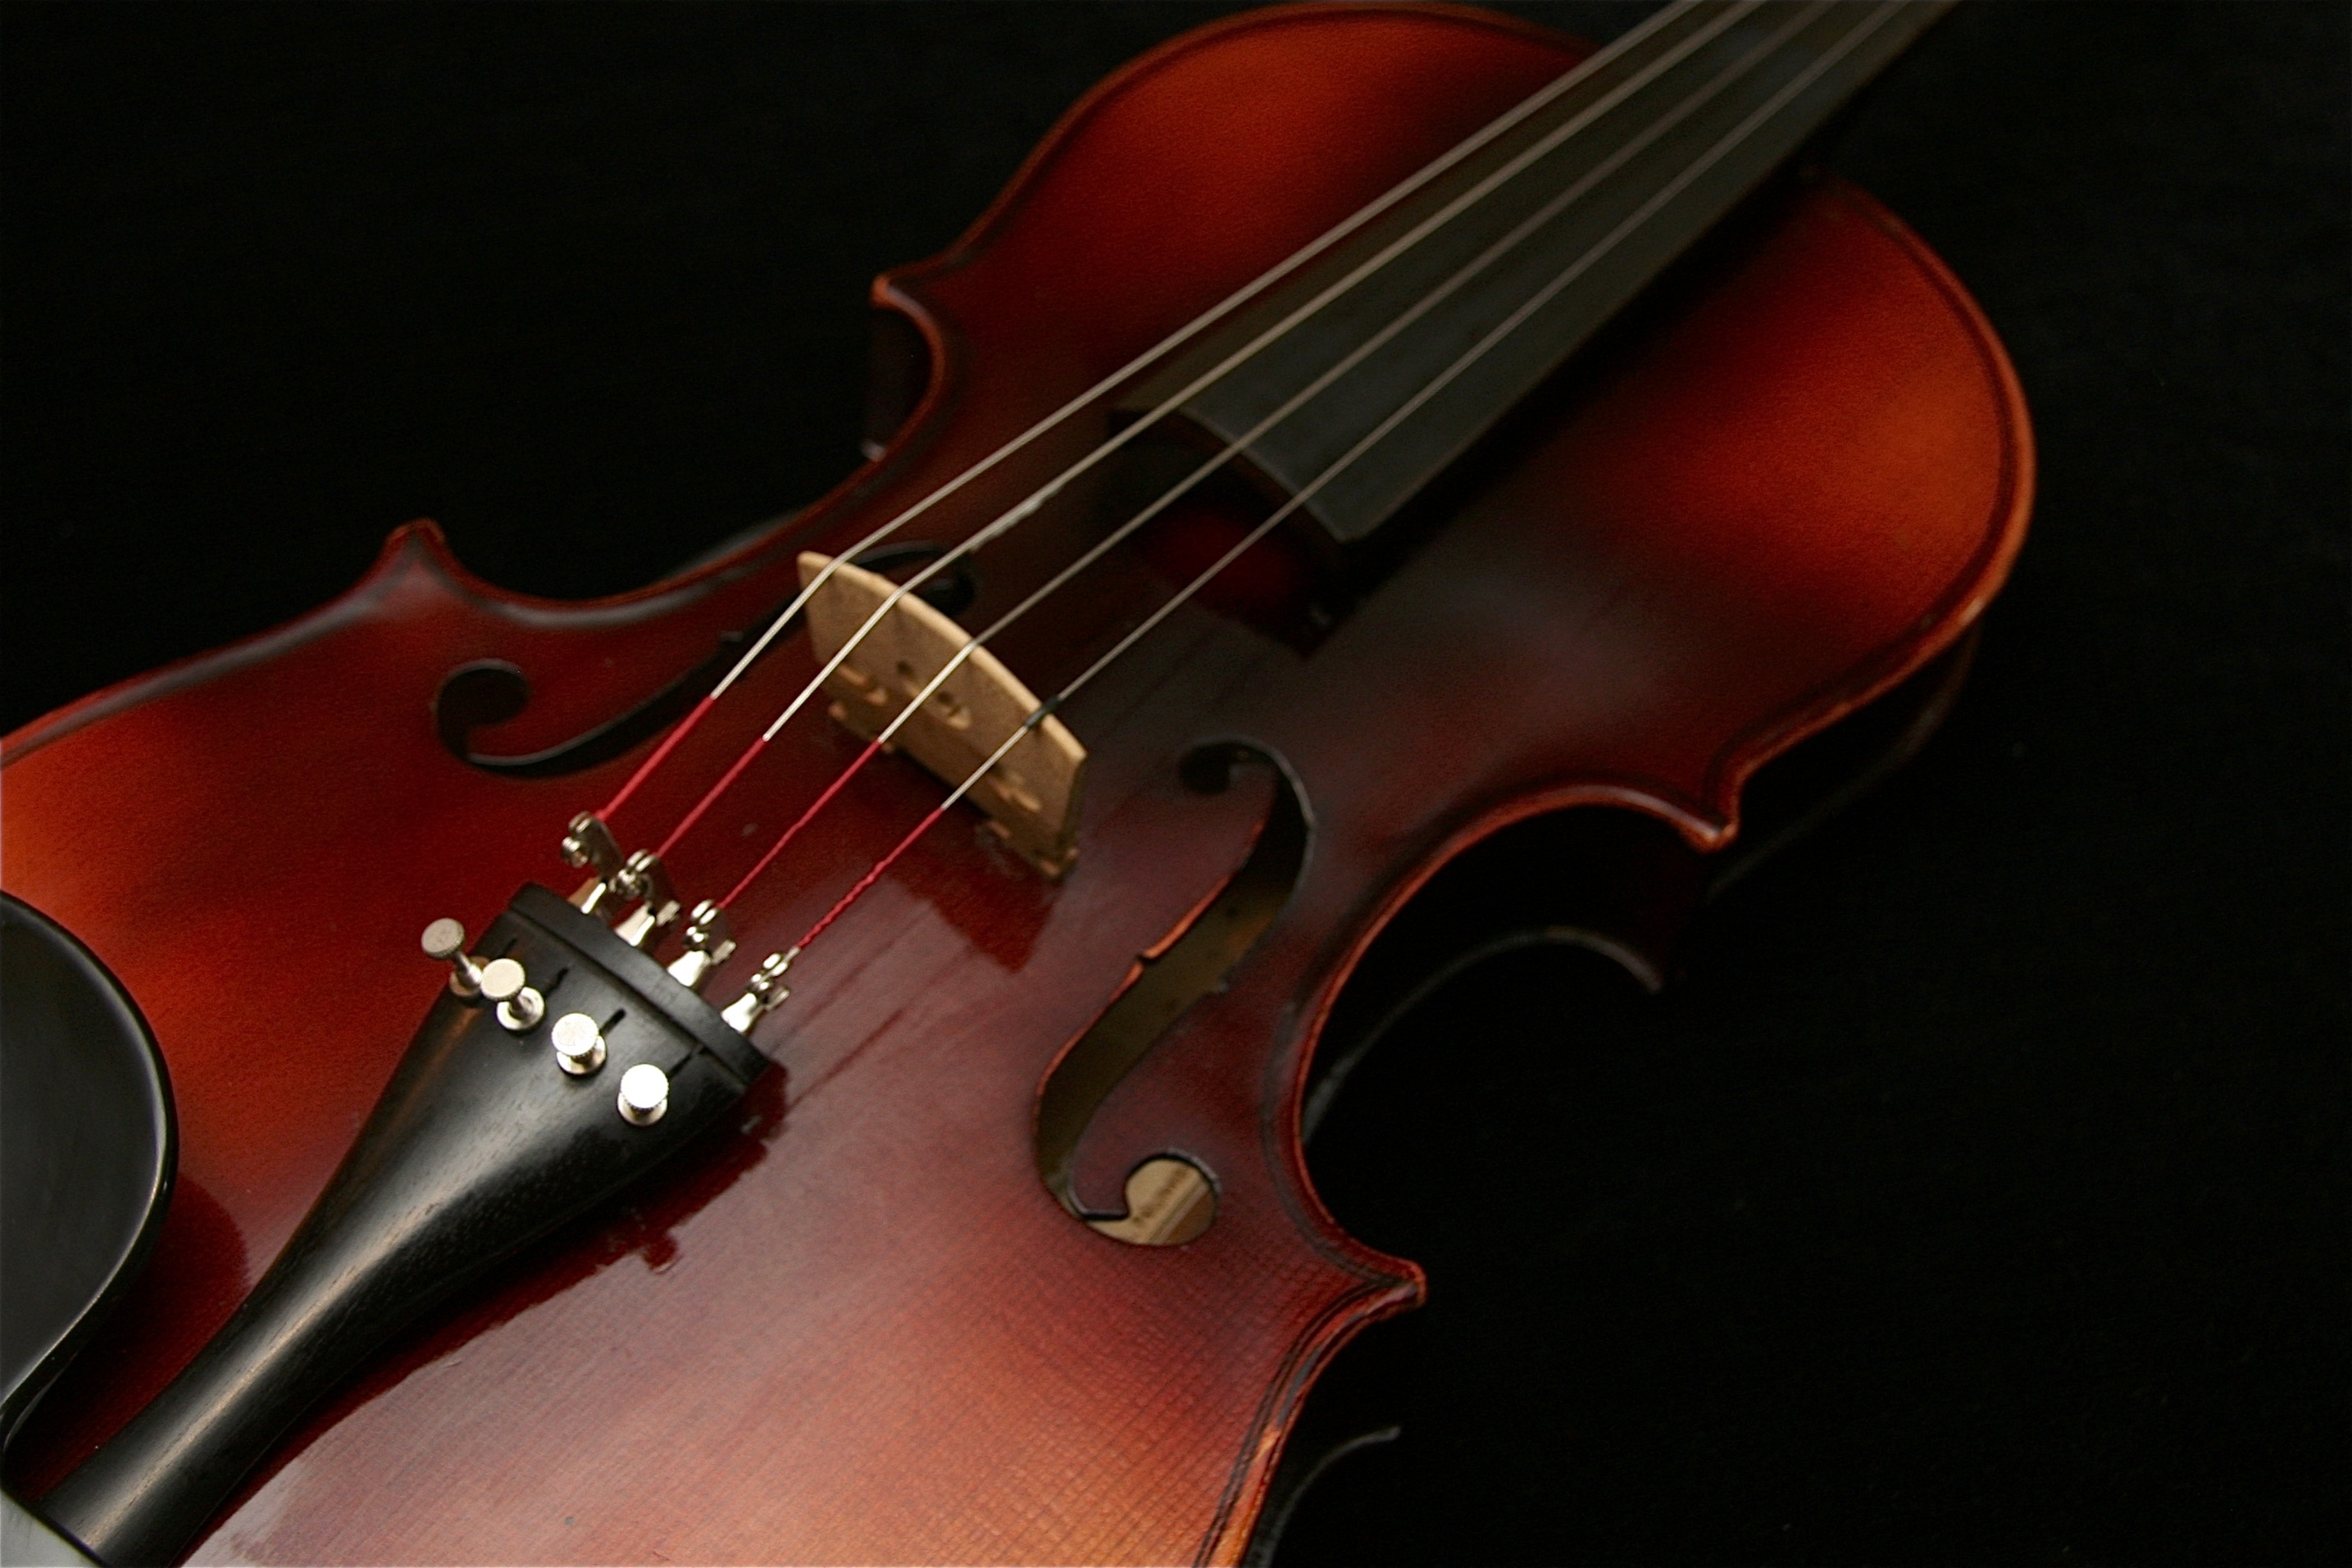 Viola: Plucked String Instruments, Vintage Style Music, Classical Musical Instrument. 2870x1920 HD Wallpaper.